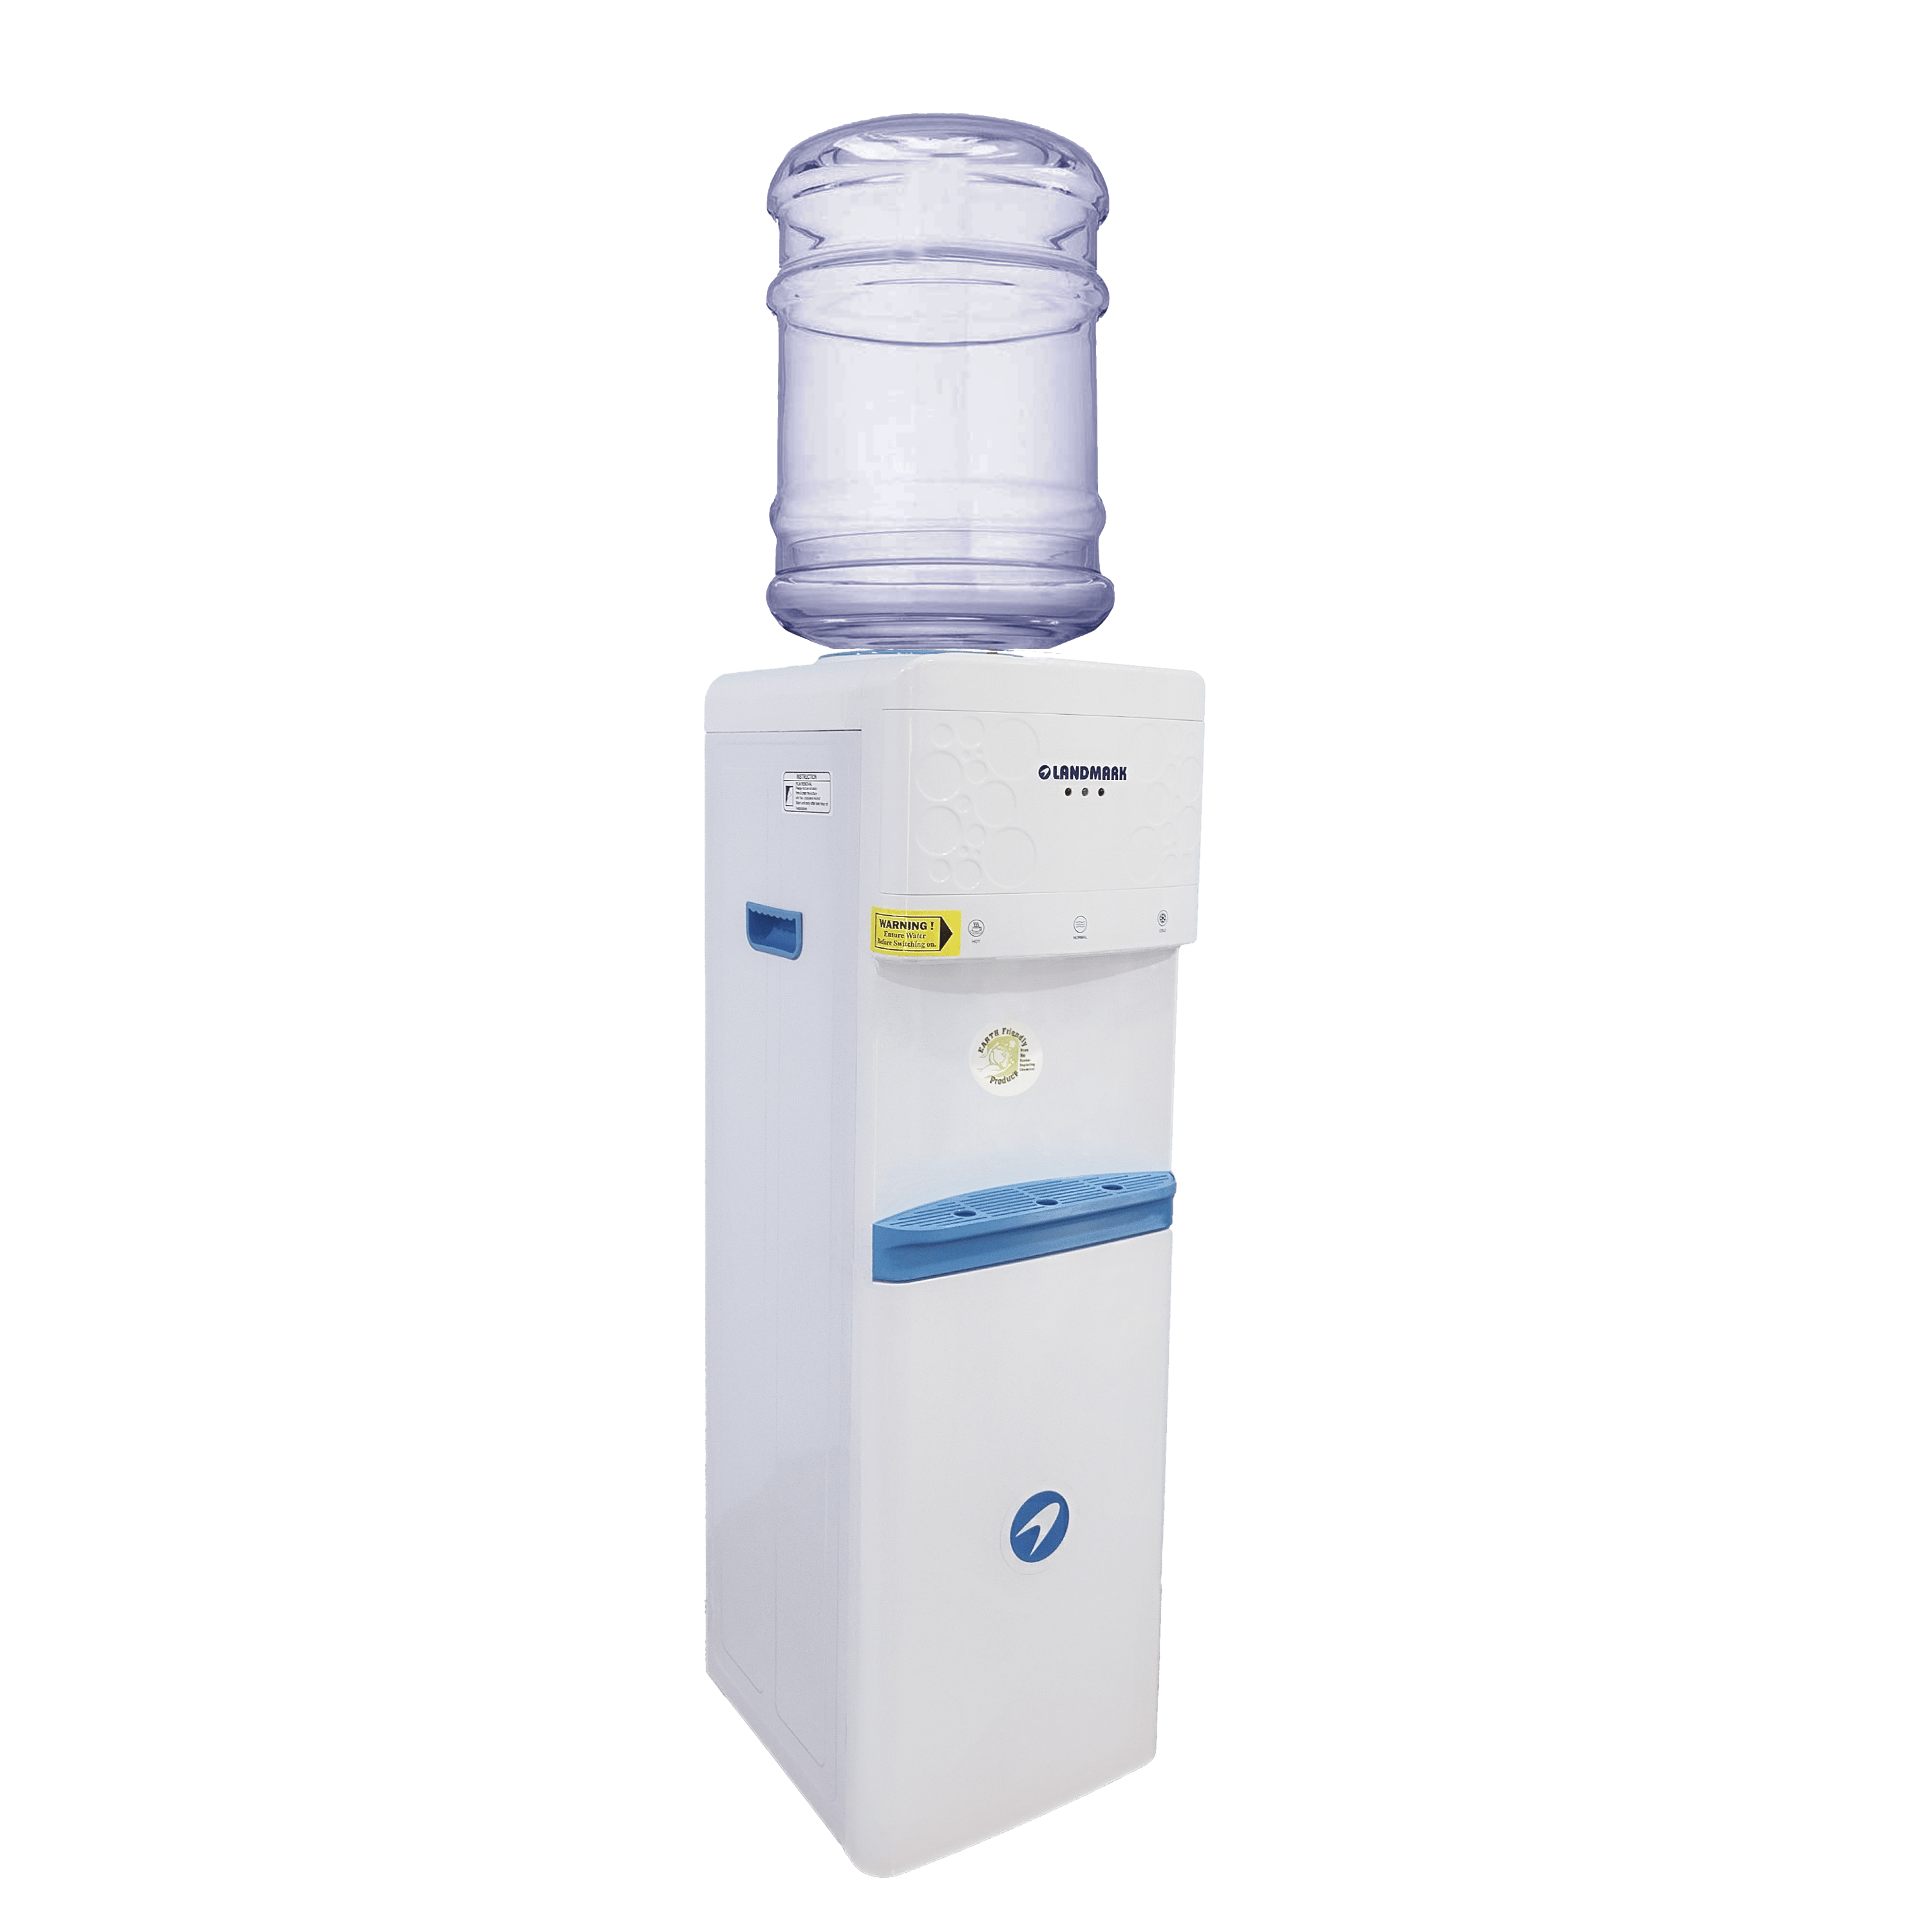 Landmark Eco (Compact) - Normal, Hot & Cold Water Dispenser